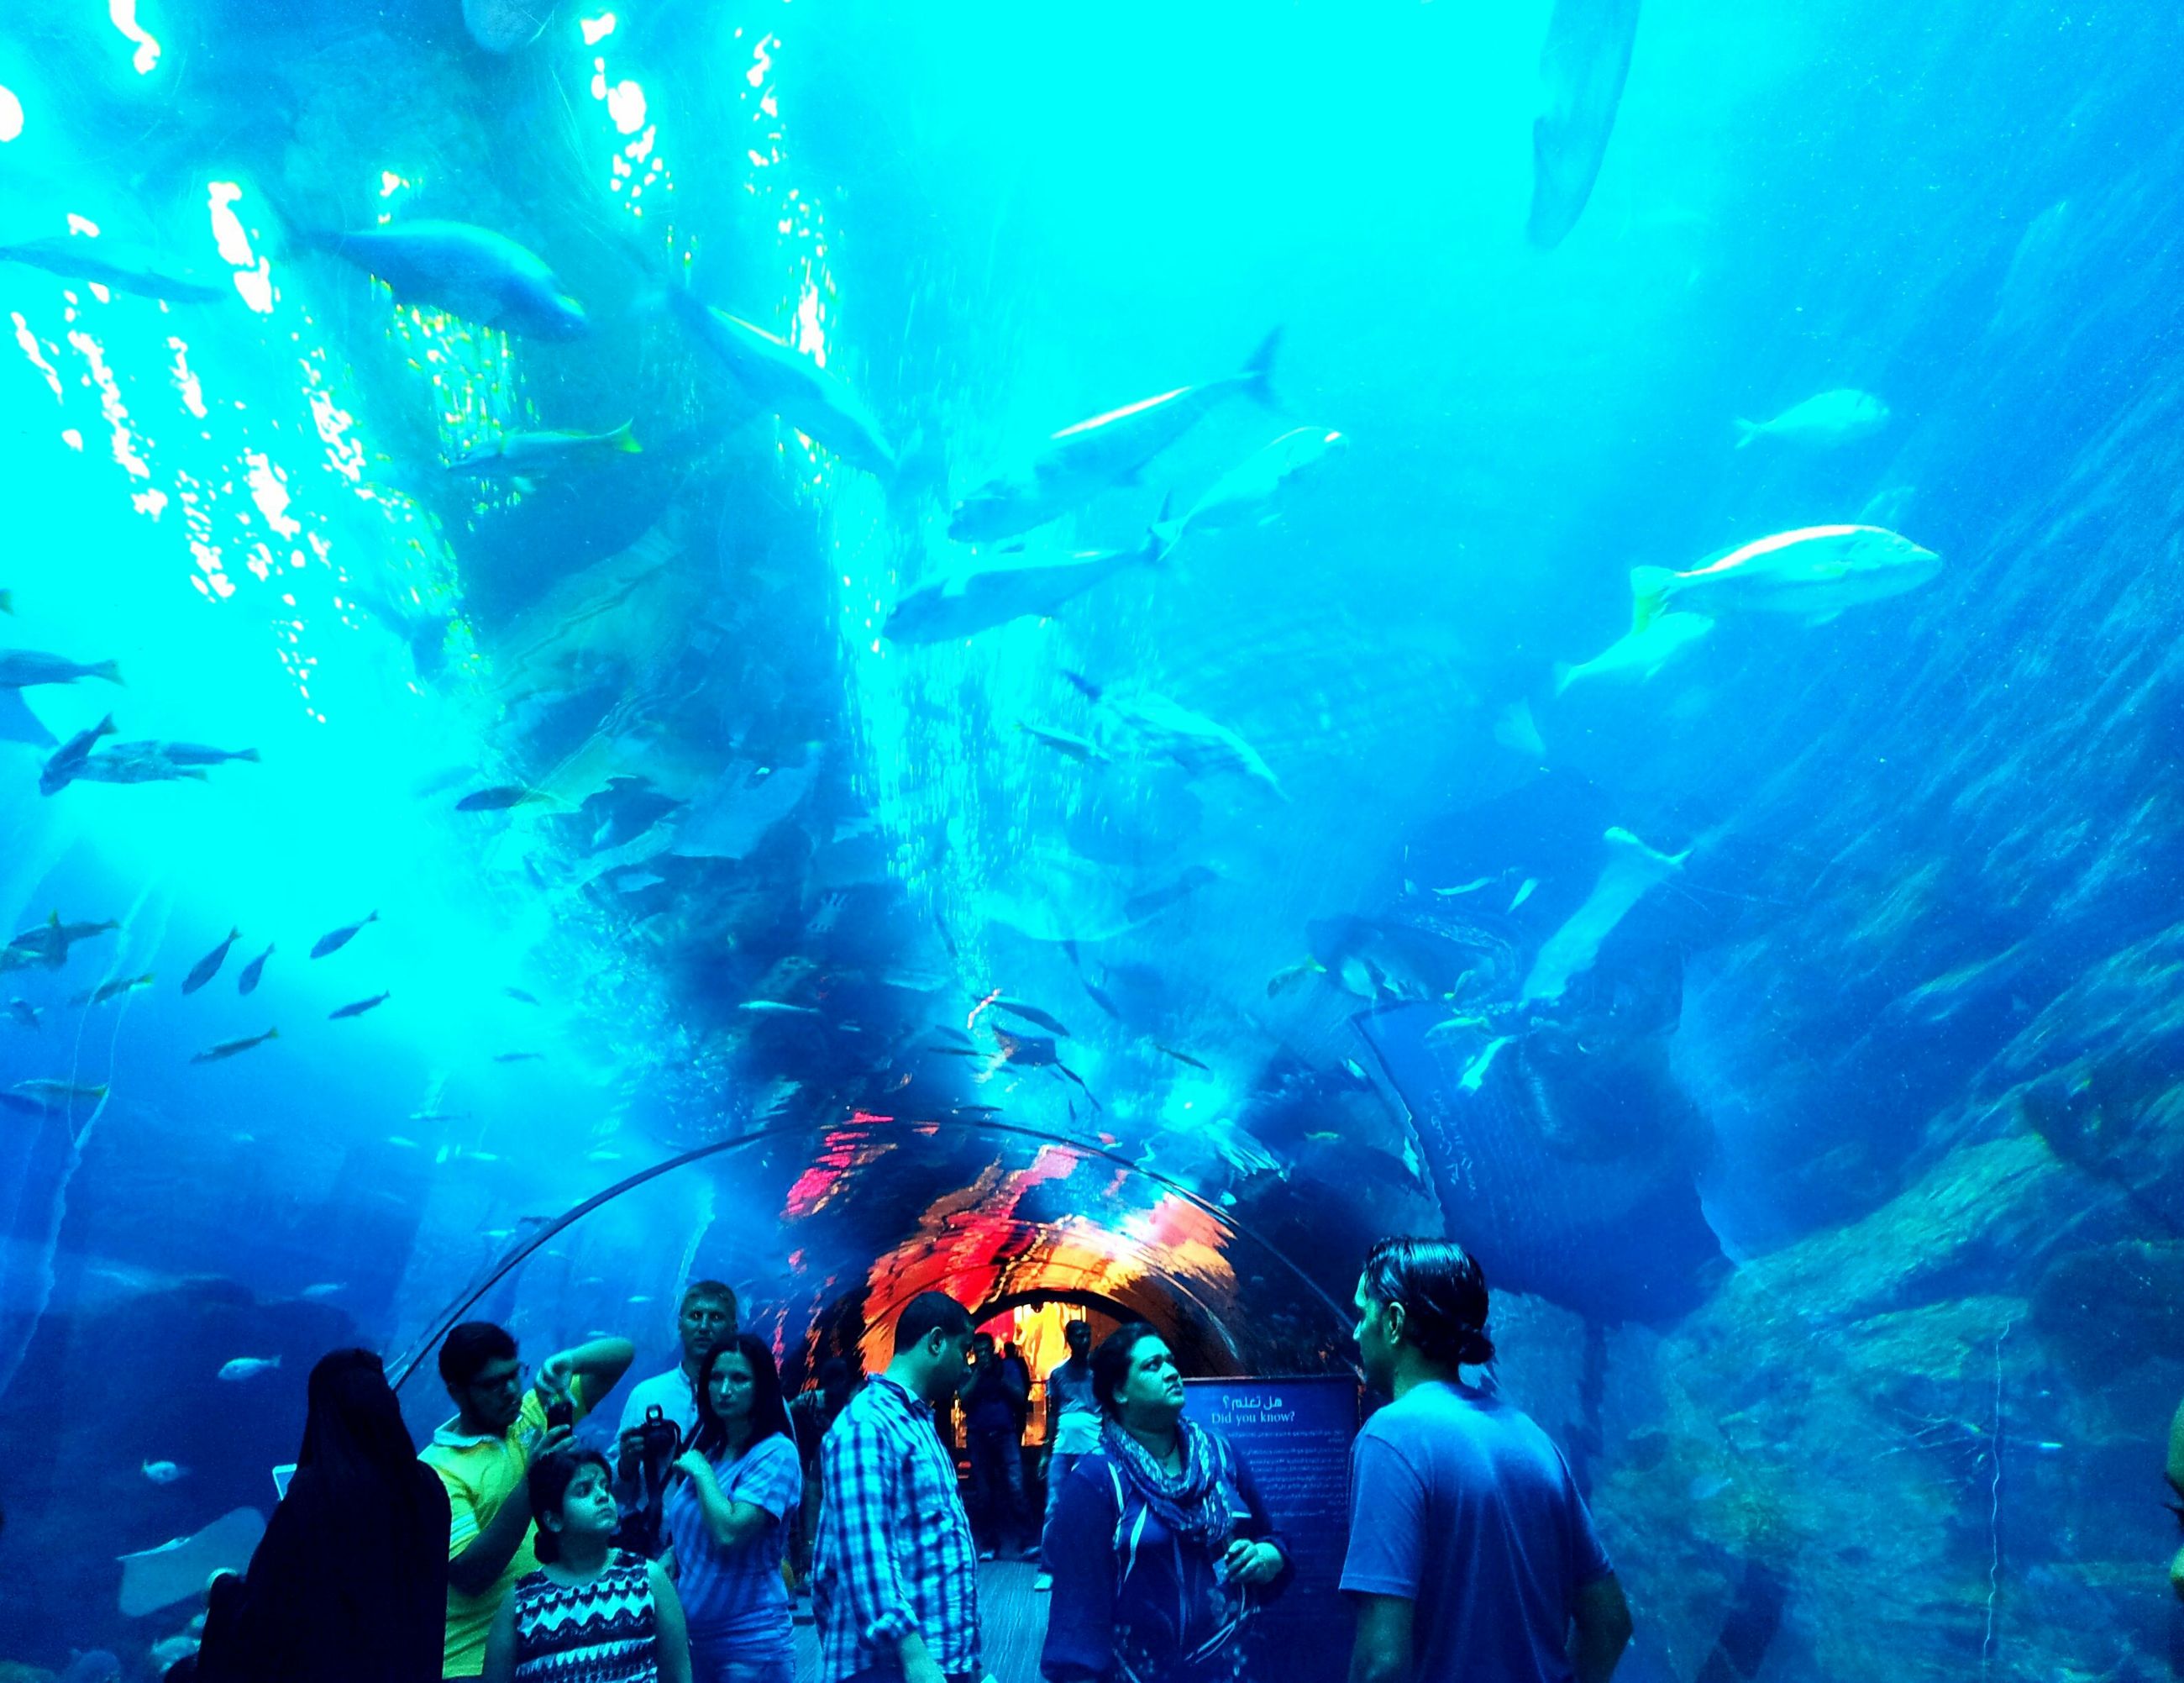 blue, underwater, large group of people, indoors, illuminated, men, lifestyles, leisure activity, enjoyment, crowd, arts culture and entertainment, togetherness, swimming, night, concert, fun, person, aquarium